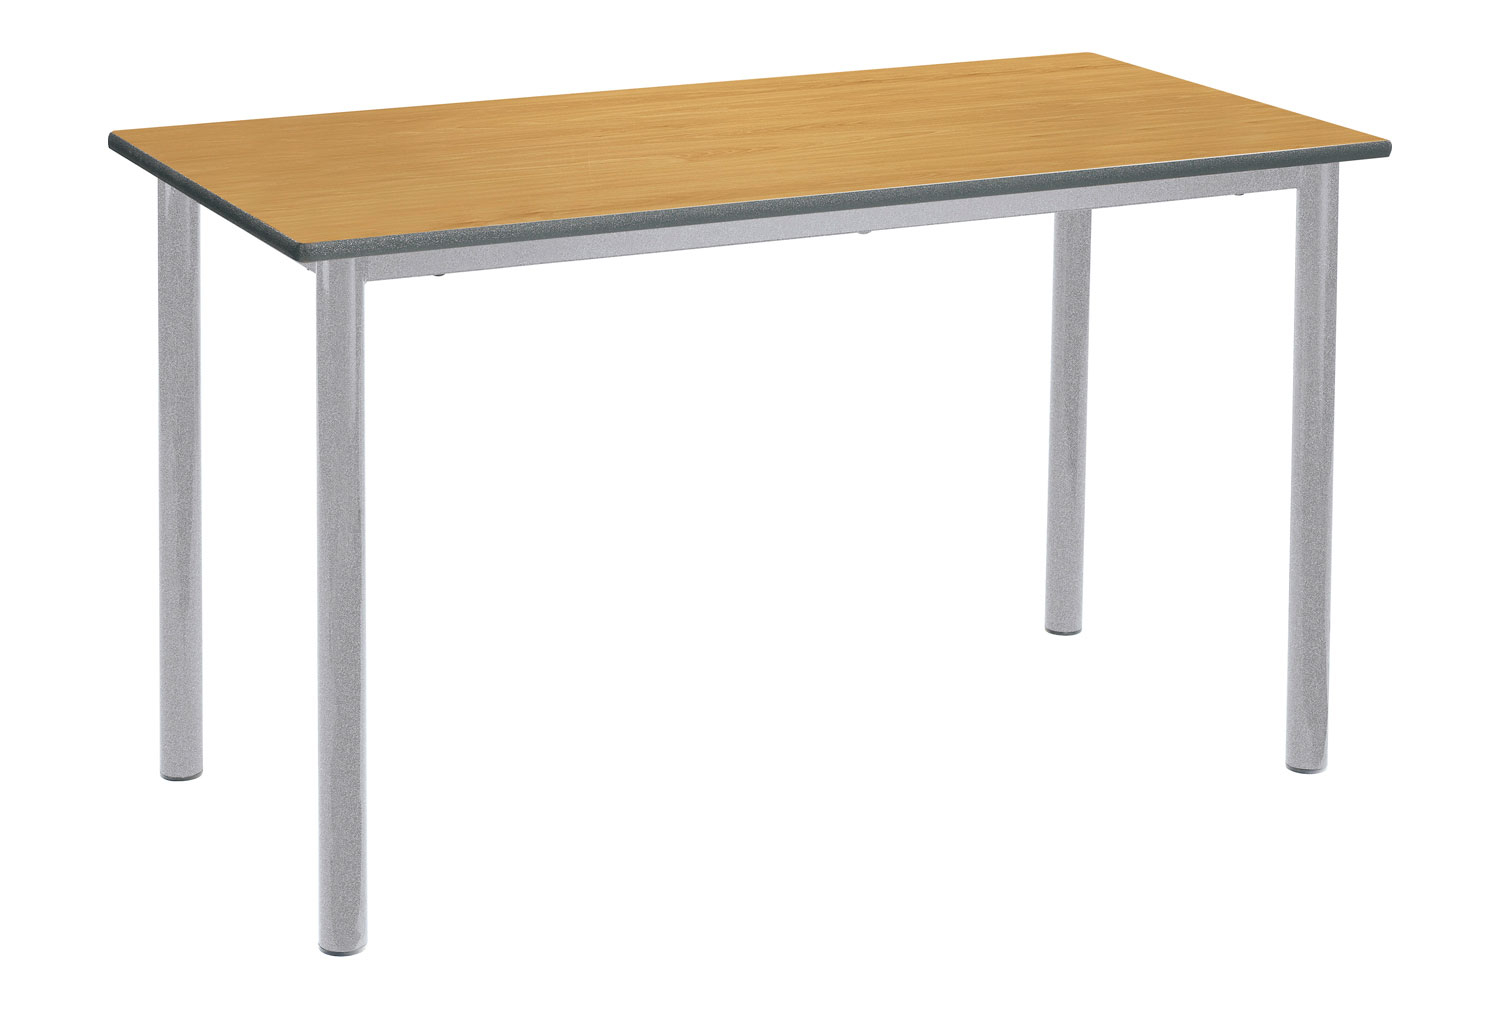 Qty 2 - RT45 Rectangular Classroom Tables 6-8 Years, 110wx55dx59h (cm), Speckled grey Frame, Soft Lime Top, MDF Edge